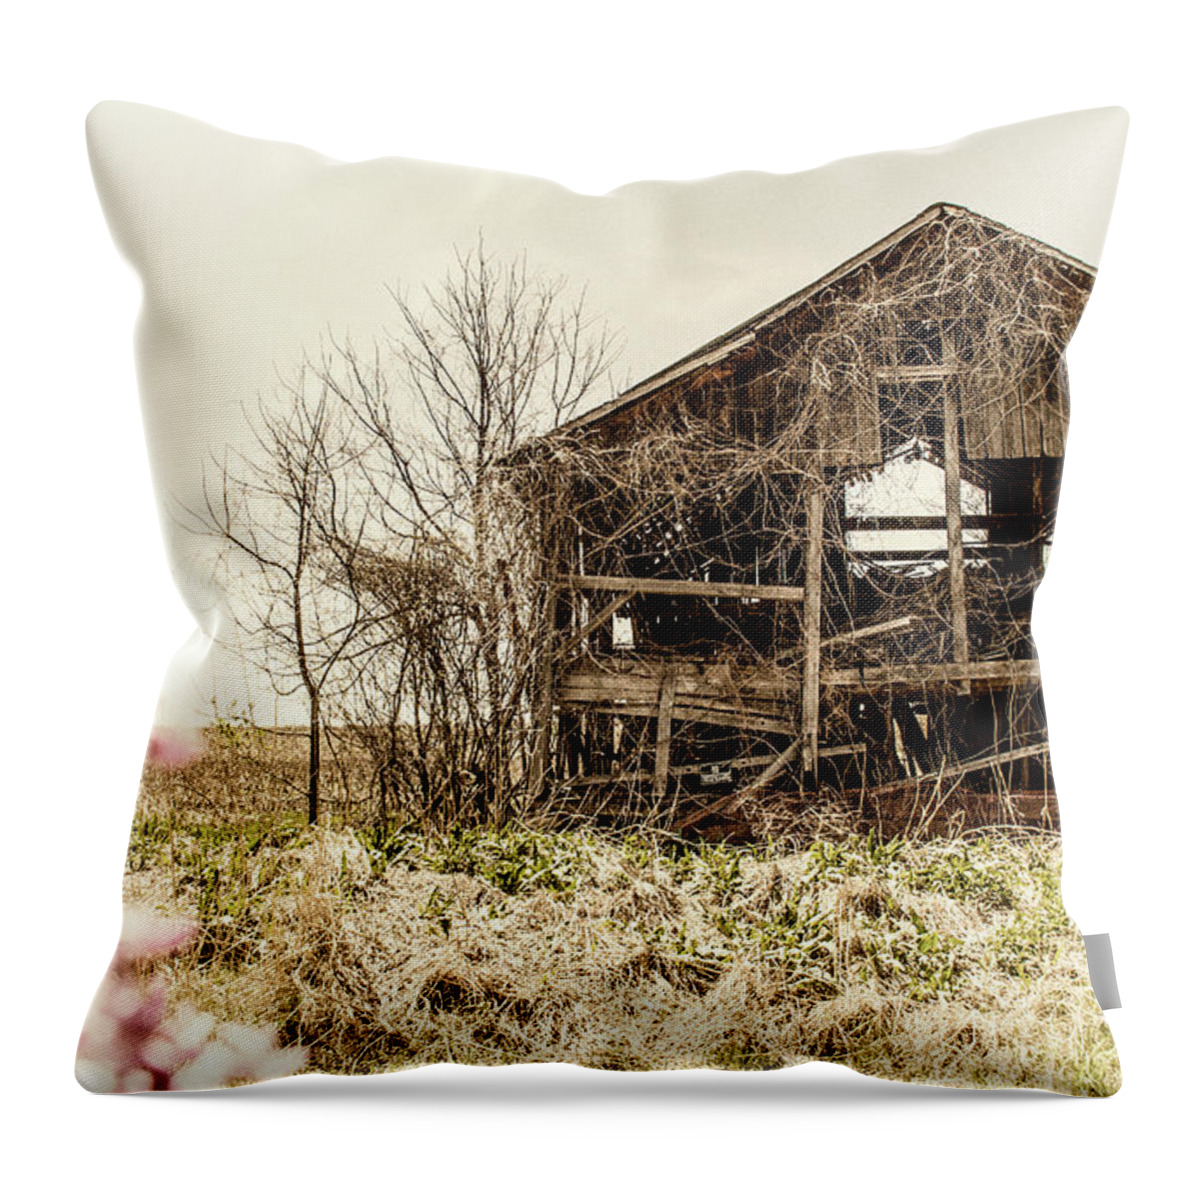 Barn Throw Pillow featuring the photograph Rickety Shack by Pamela Williams